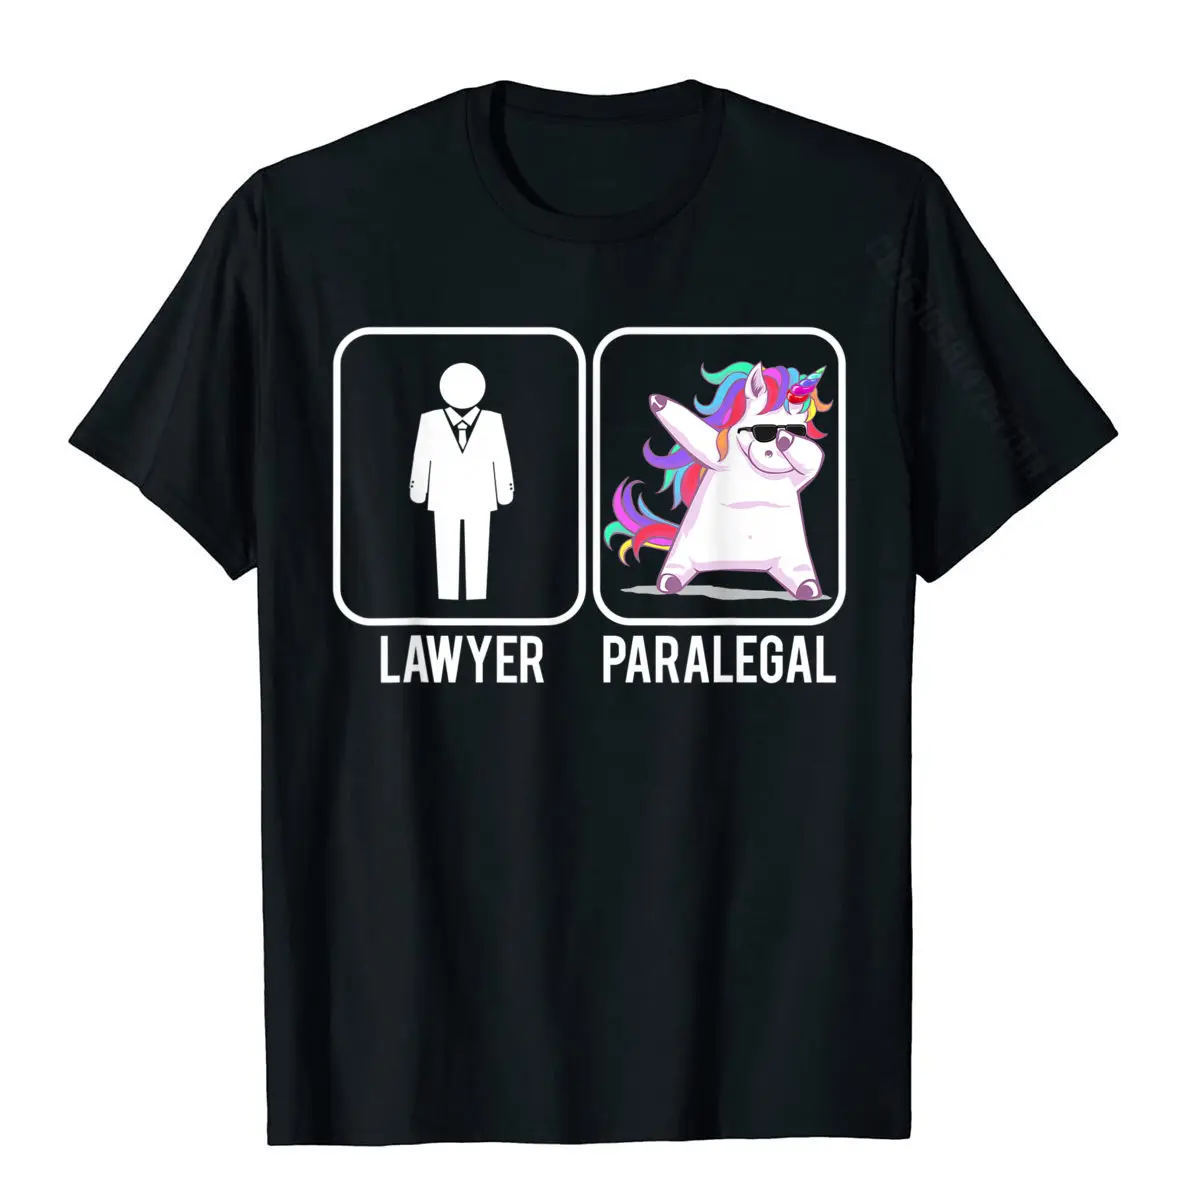 Funny Lawyer Paralegal Dabbing Unicorn Legal Law Firm T-Shirt Cotton Tops Tees For Men Camisa Tshirts Normal Slim Fit